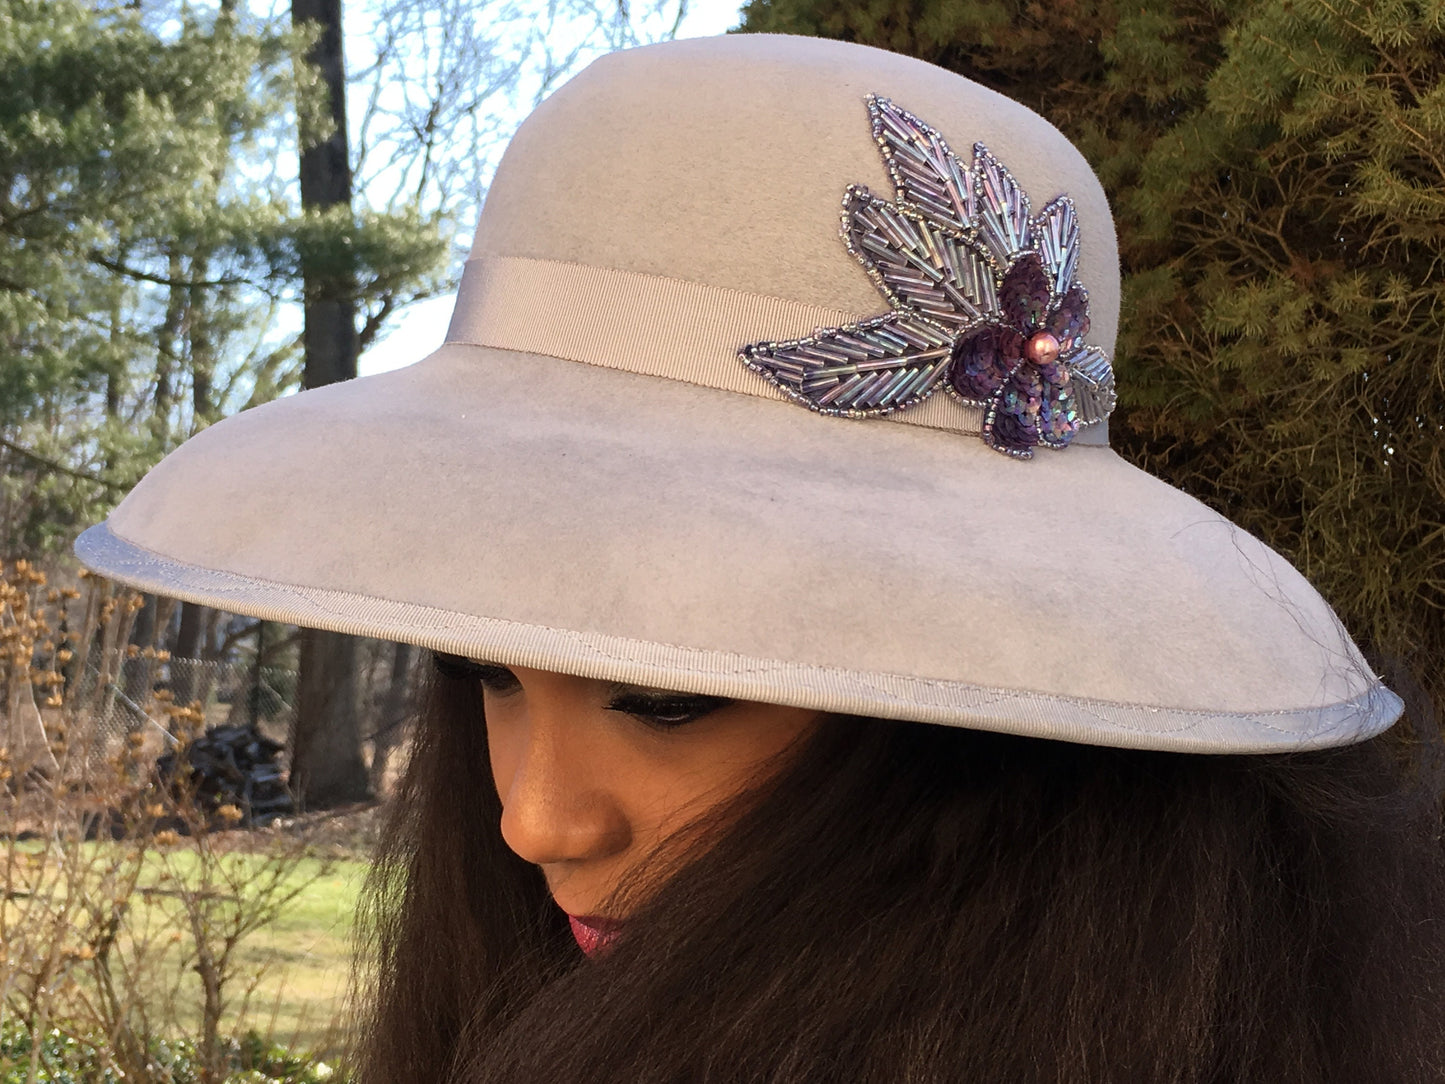 Wide Wavy Brimmed Hat, Grey Velour Hat with Beaded appliqué in Purples and Mauves. Beaded appliqué on Grey Velour hat. Church or wedding hat